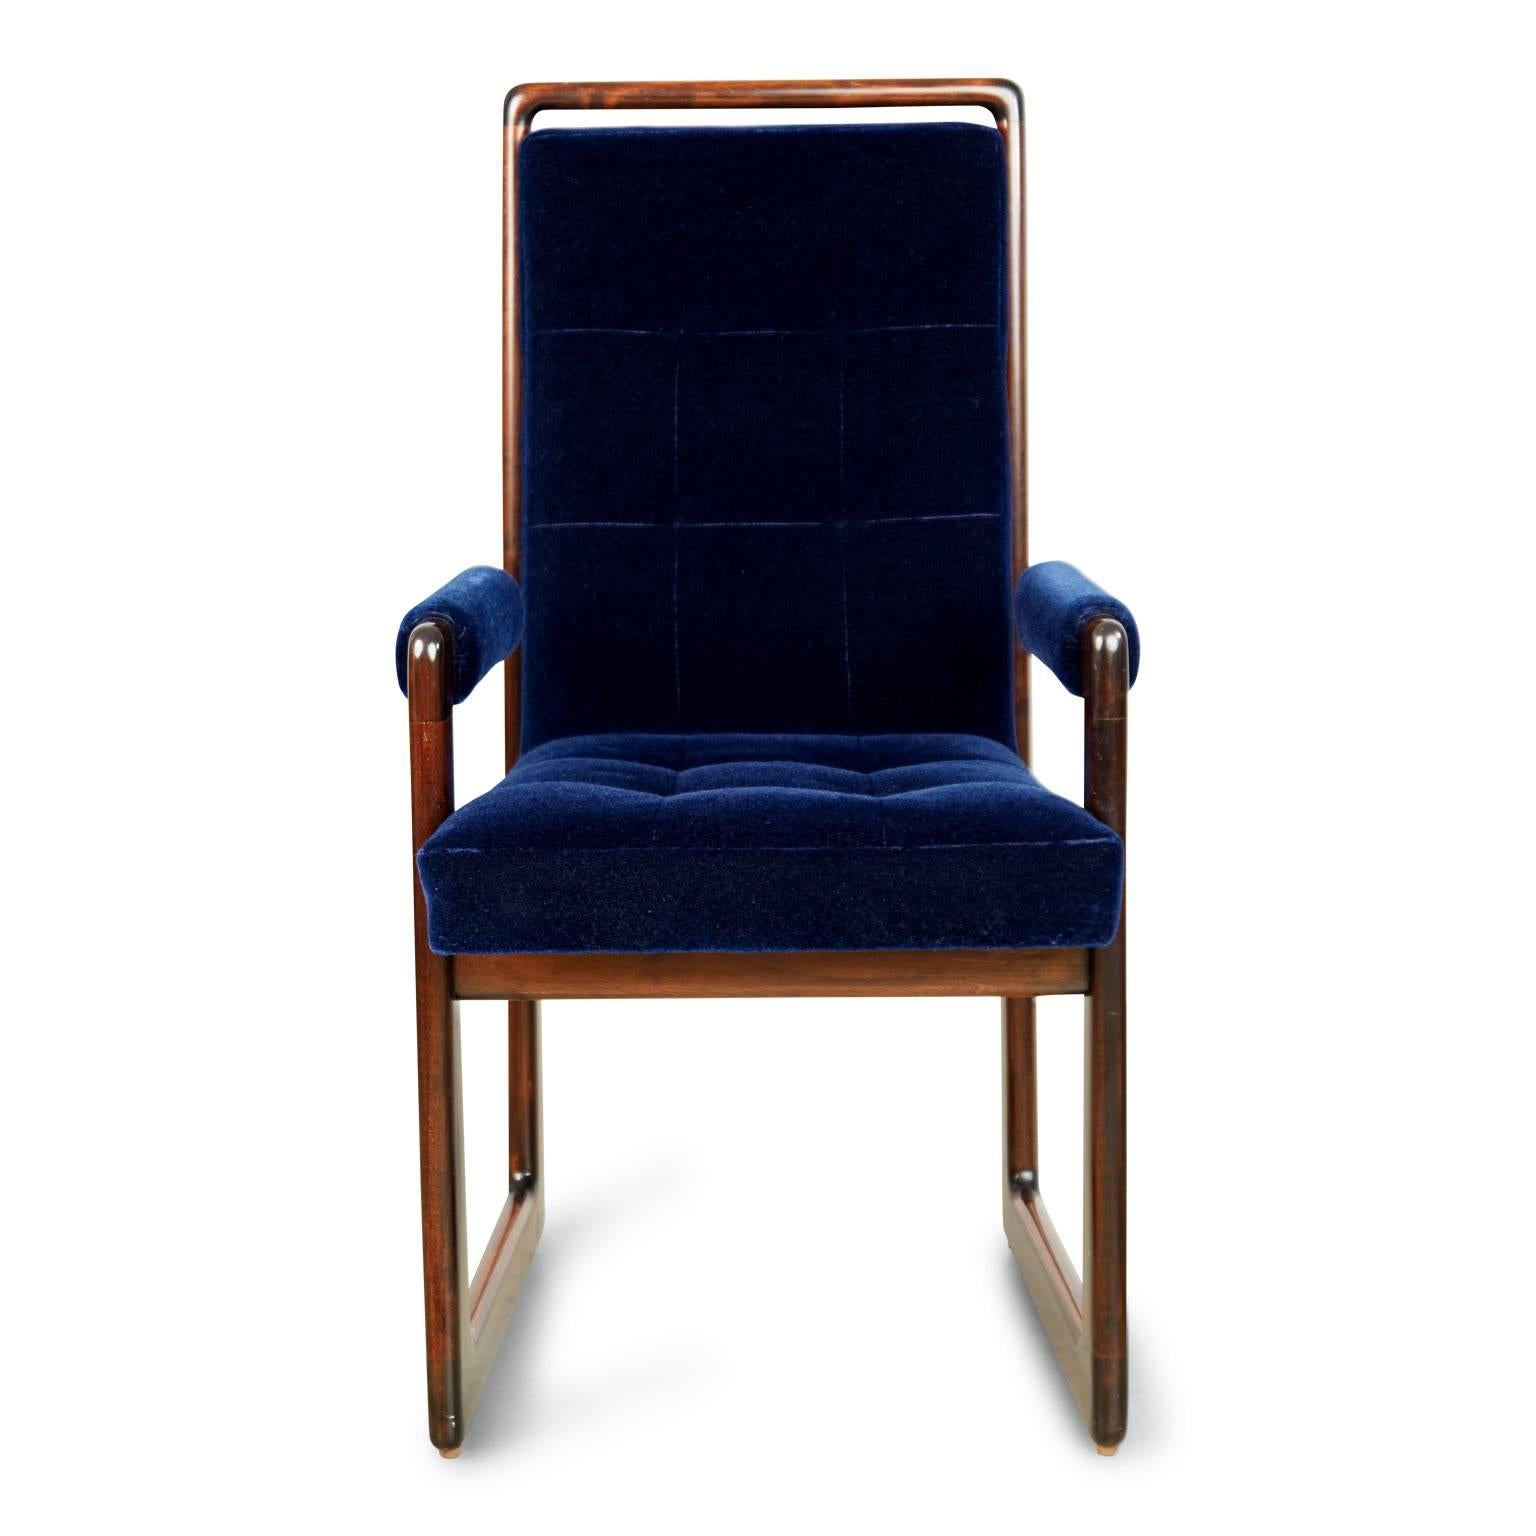 It doesn't get any better than this extremely rare and exceptionally stunning set of eight lacquered rosewood dining chairs by Vladimir Kagan which includes six side chairs and two armchairs. This set dates to the 1960s per the attached